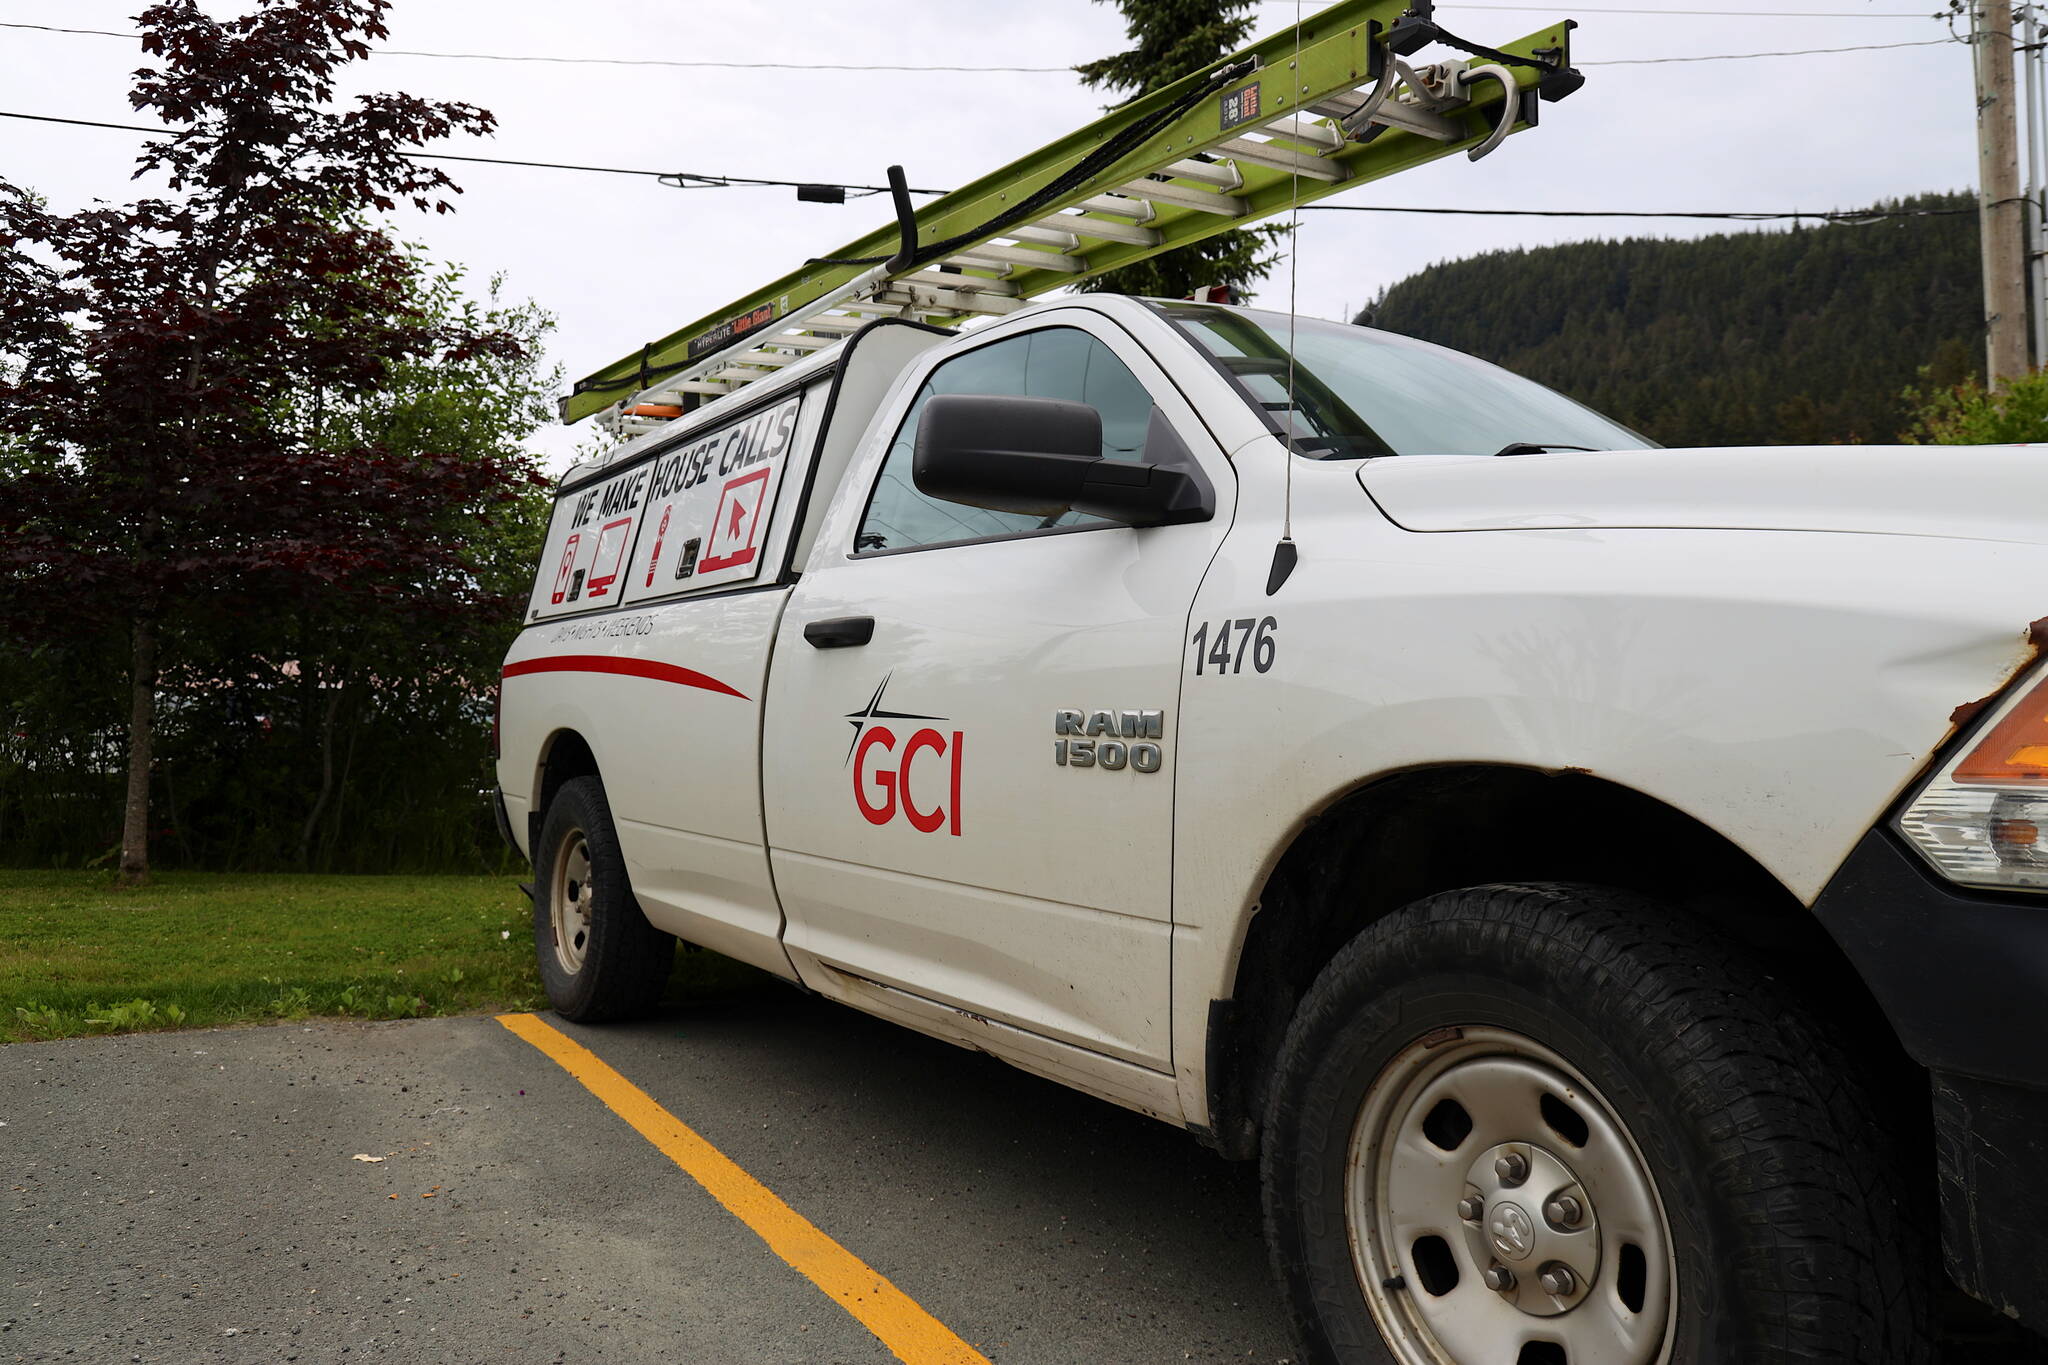 A GCI Communications truck is parked at the company’s Juneau office on Wednesday. The company’s landline service suffered outages in recent days that the company said were fixed as of Tuesday. (Clarise Larson / Juneau Empire)